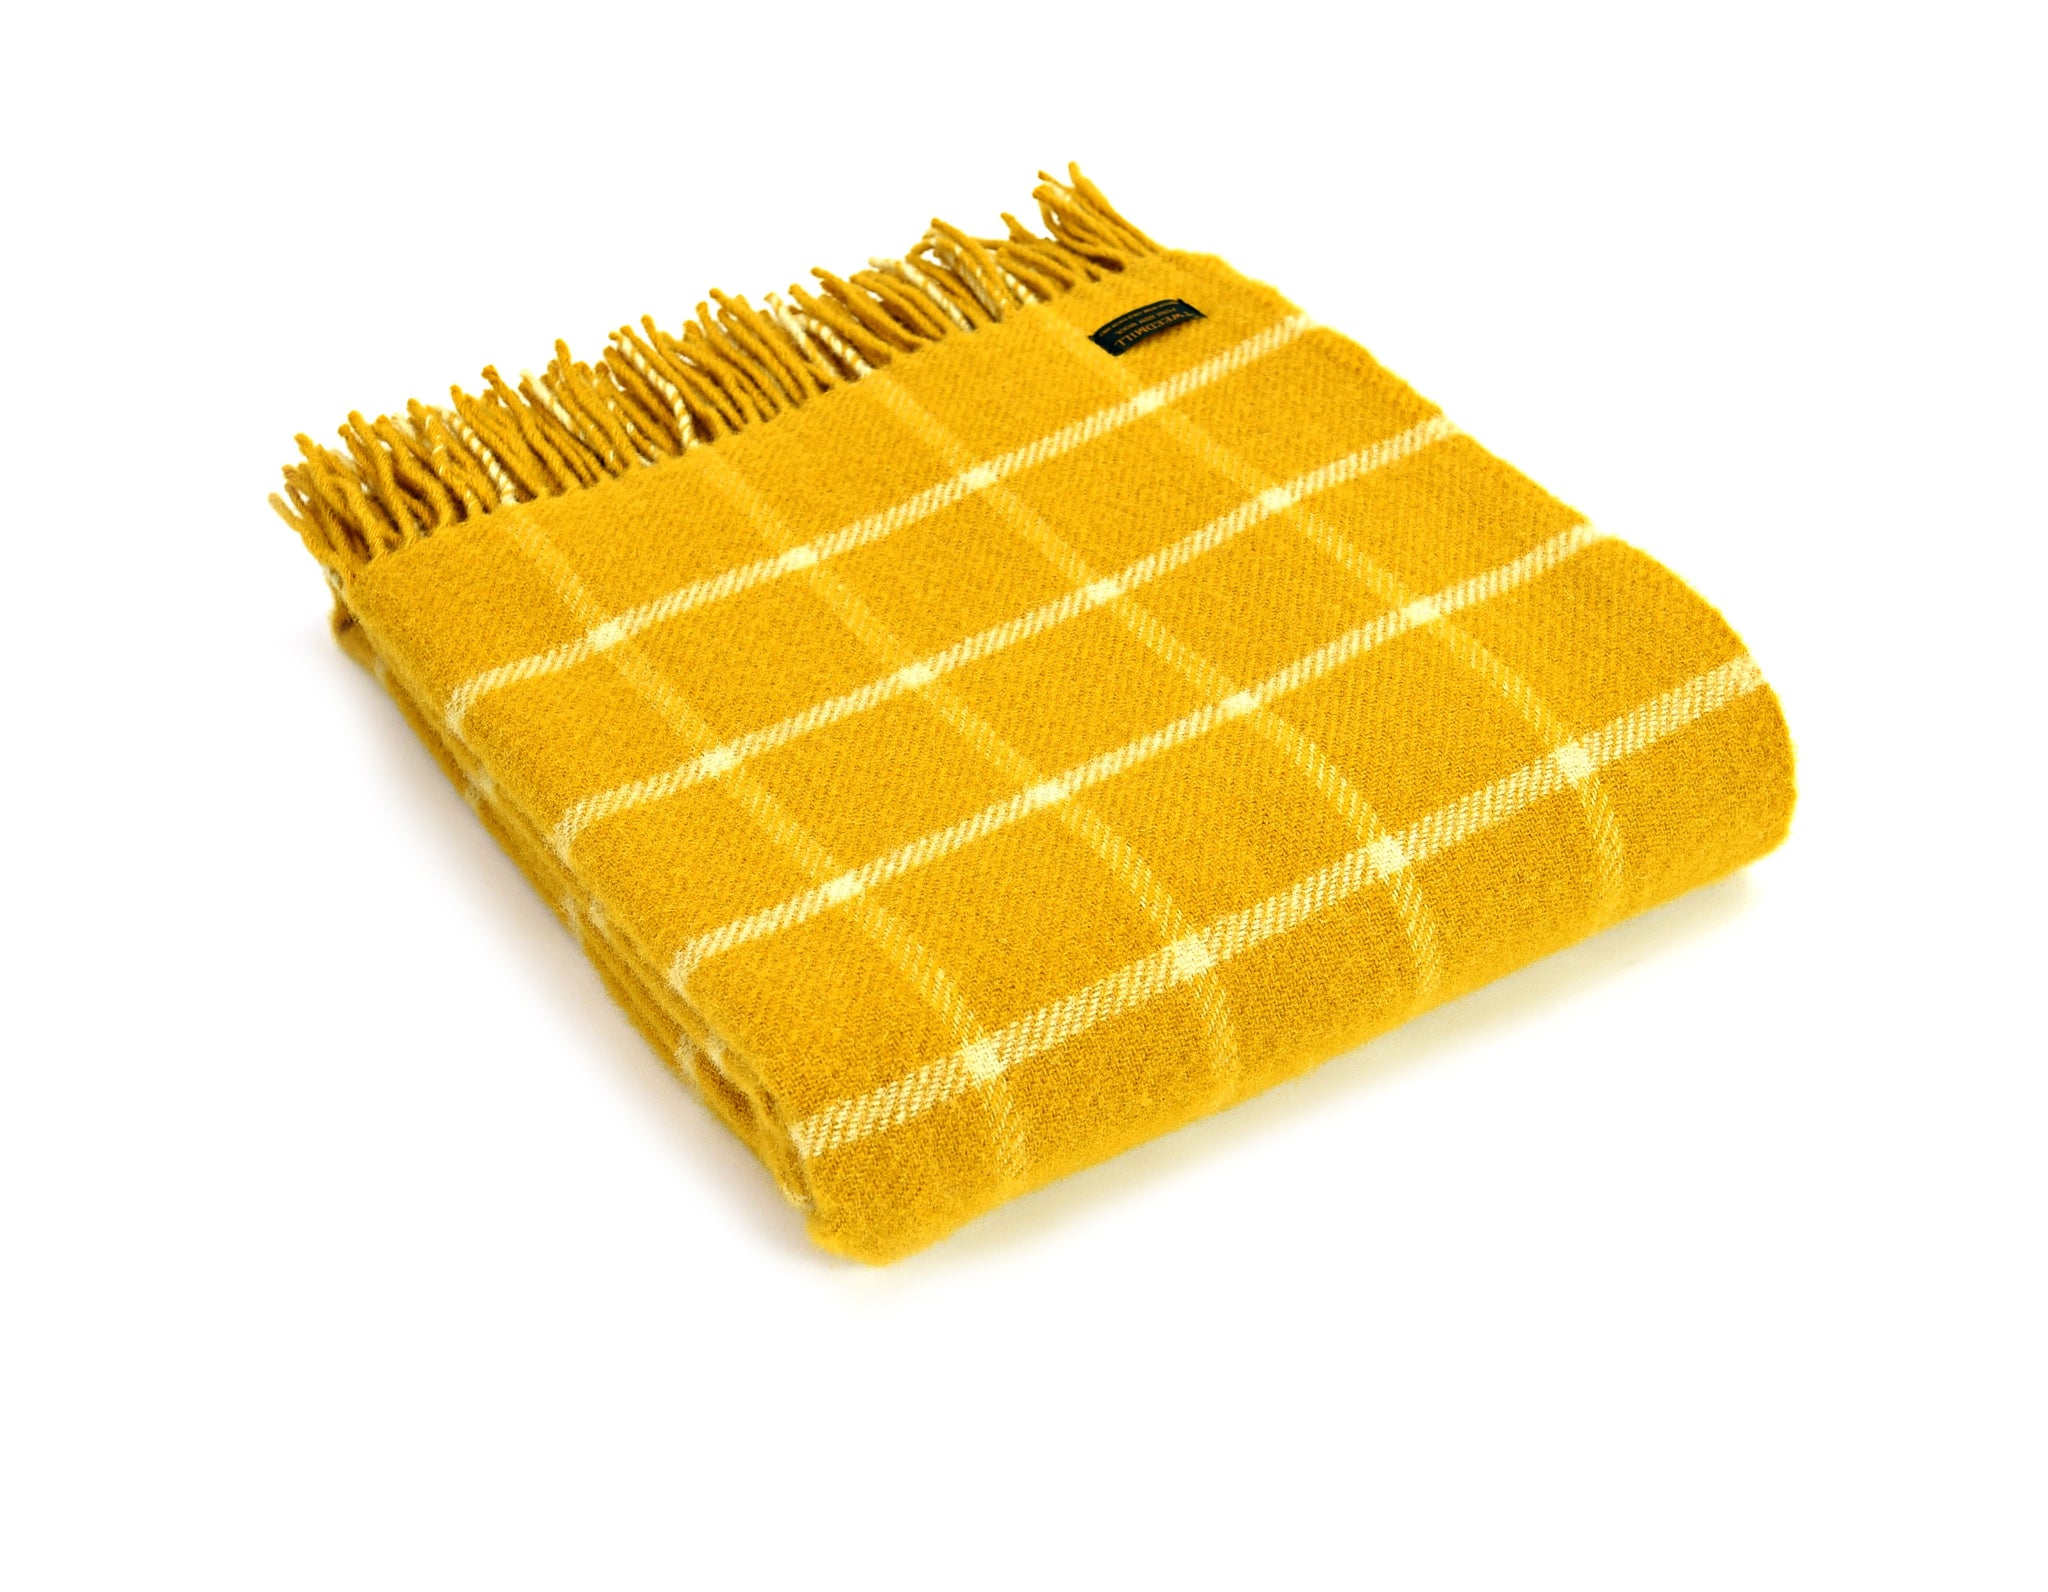 Bestselling Tweedmill Yellow chequered wool throw blanket